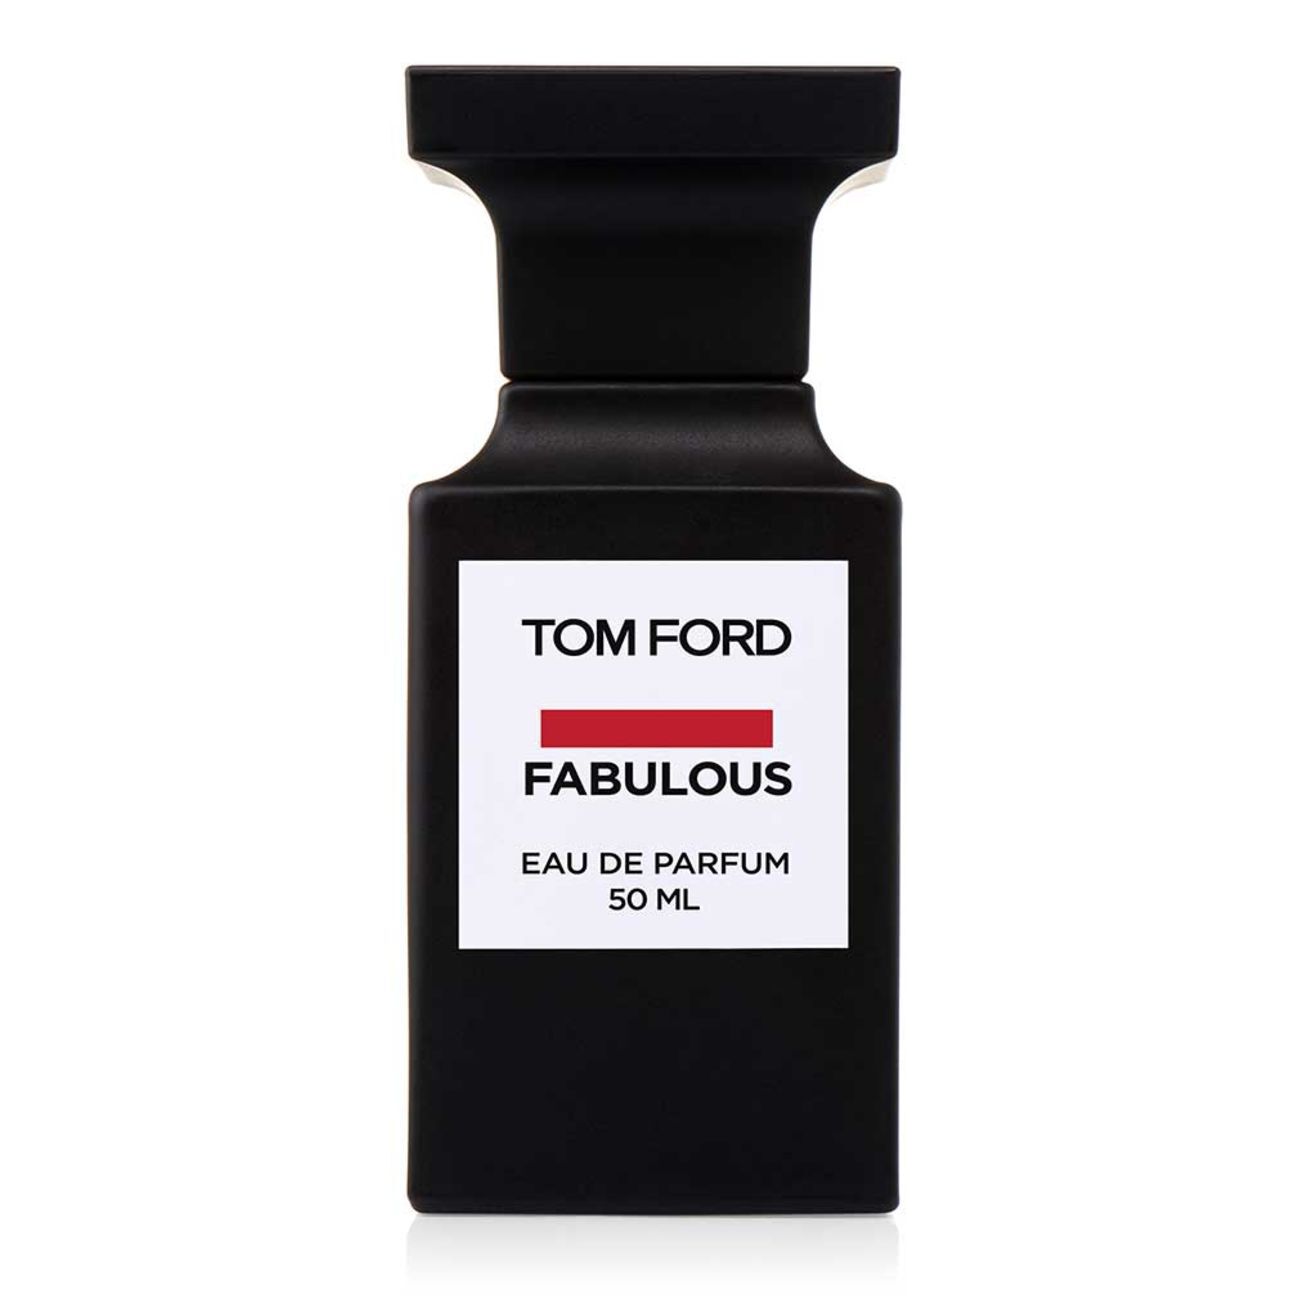 Tom Ford Fabulous Fragrance | Heathrow Reserve & Collect